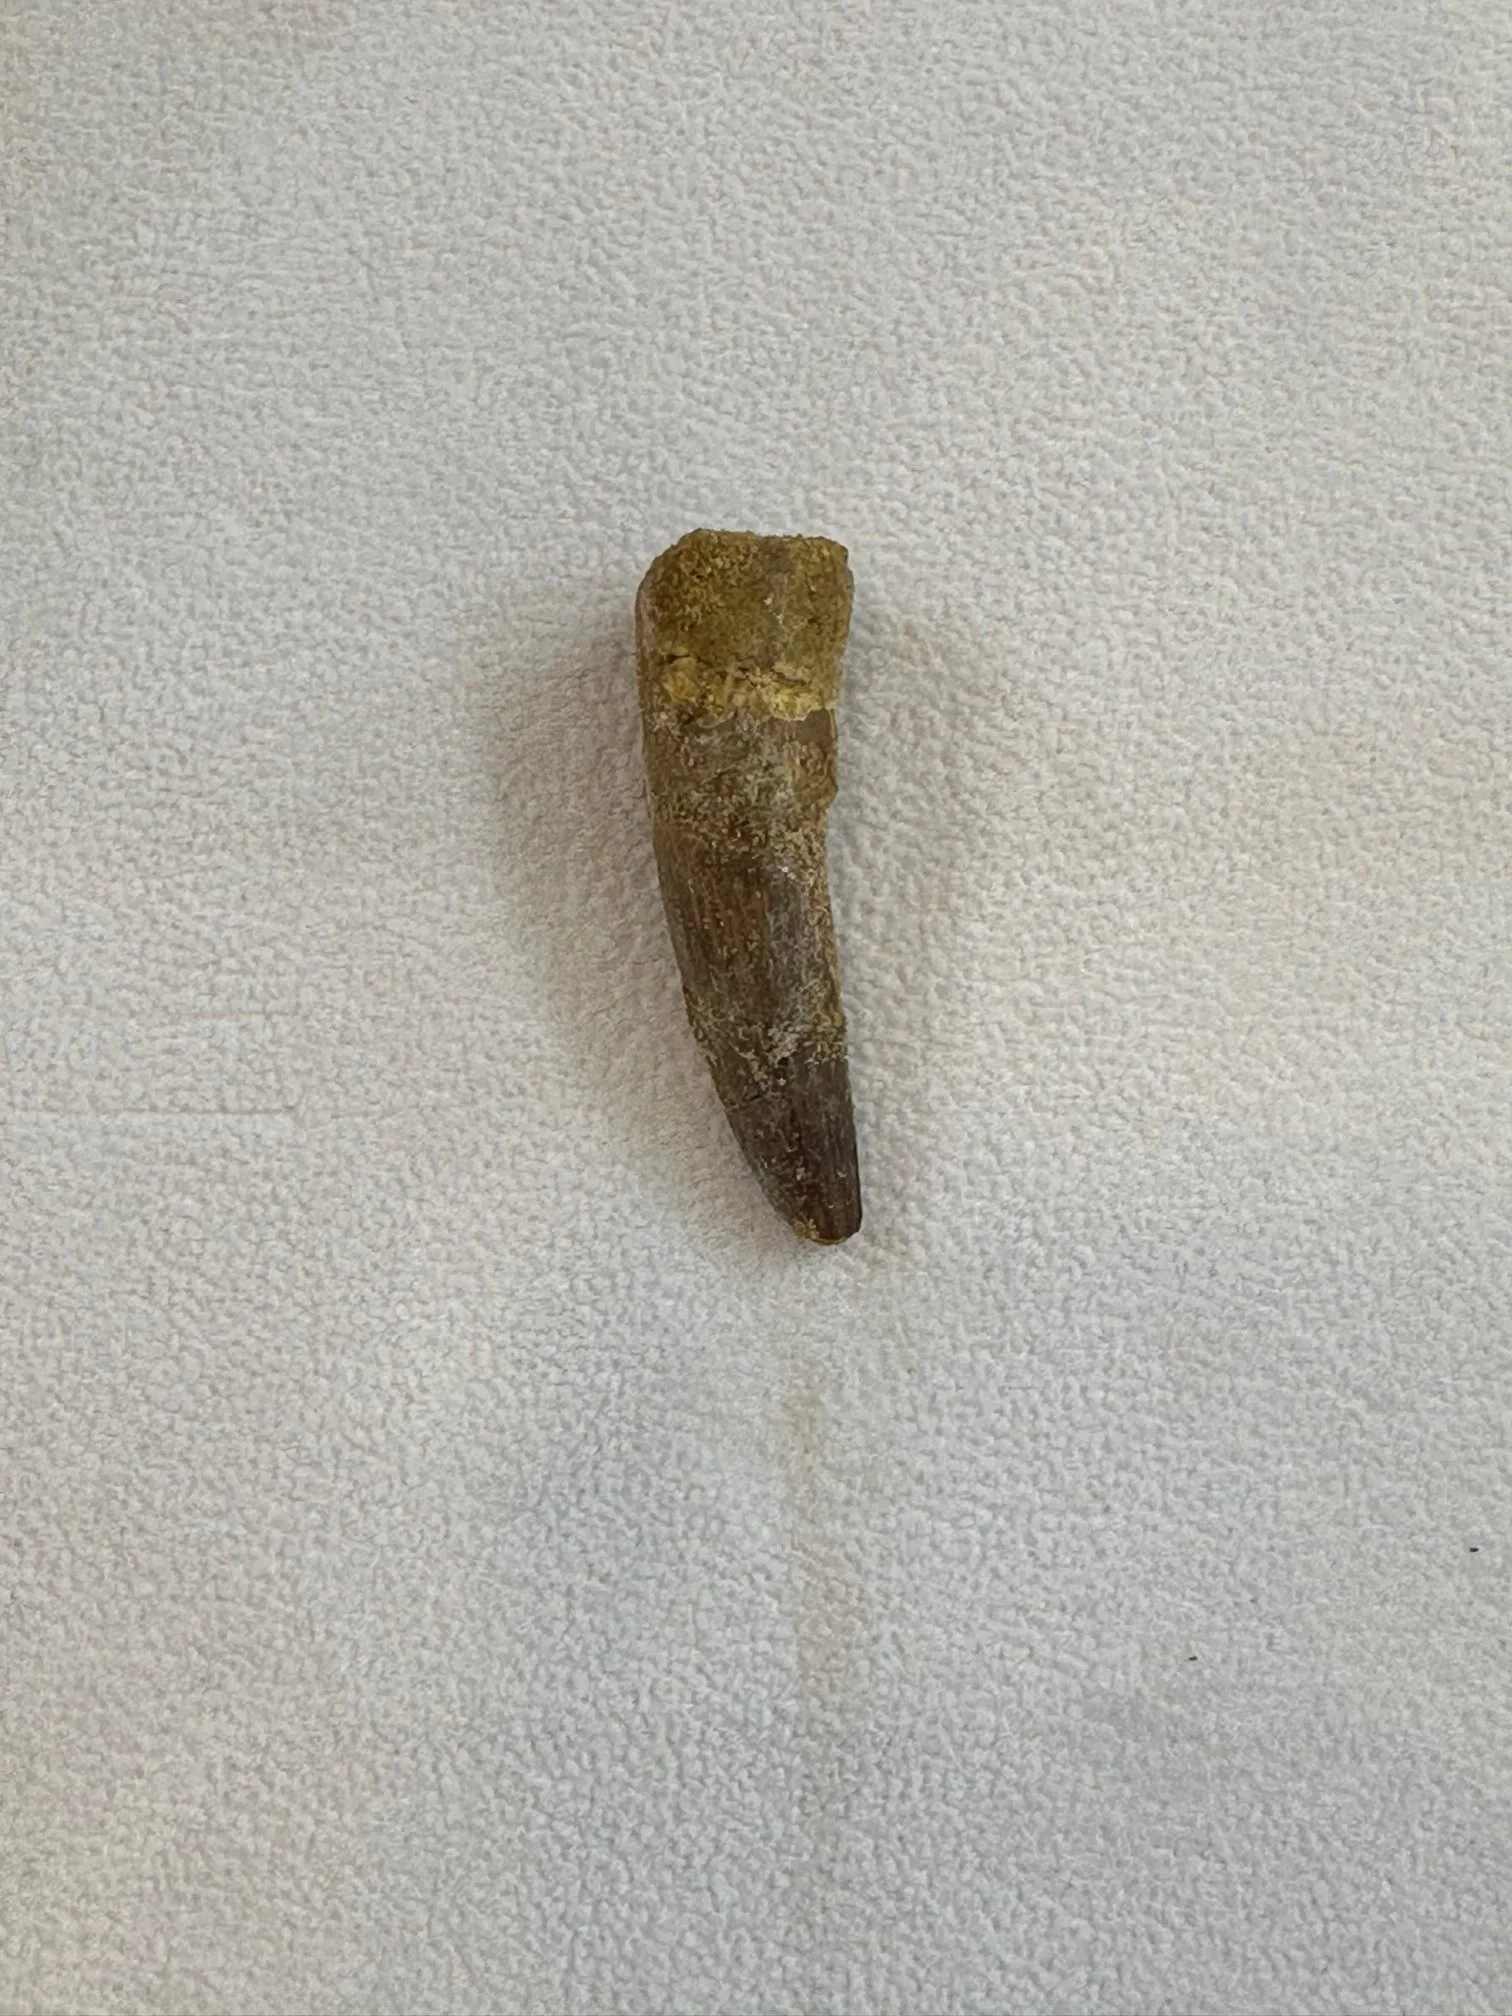 Spinosaurus Tooth, Morocco, near 2 inch in length Prehistoric Online